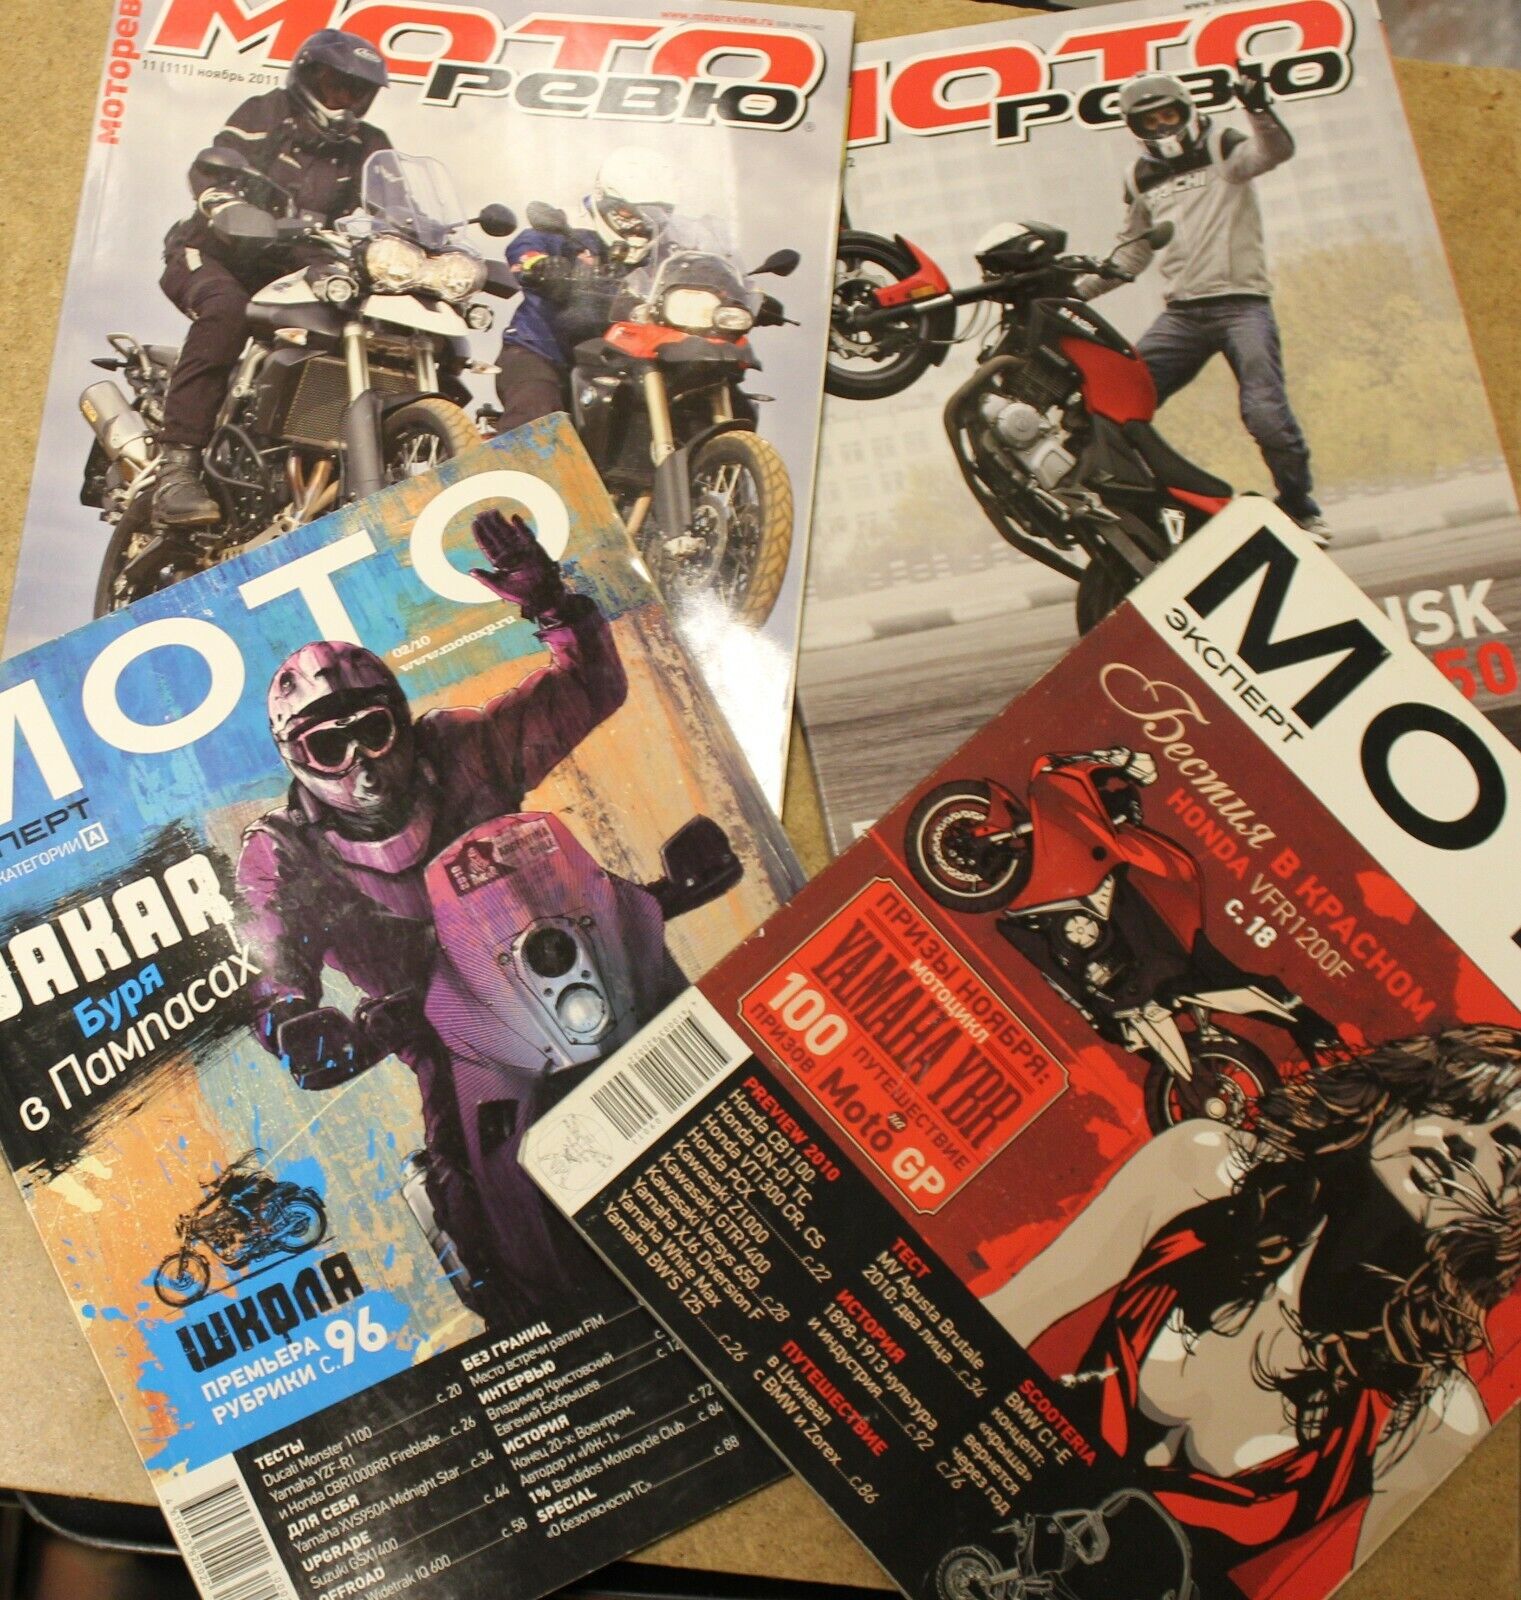 11658.Set of Russian Motocycle Magazines 51 issues 2004-2018. Moto, Moto review